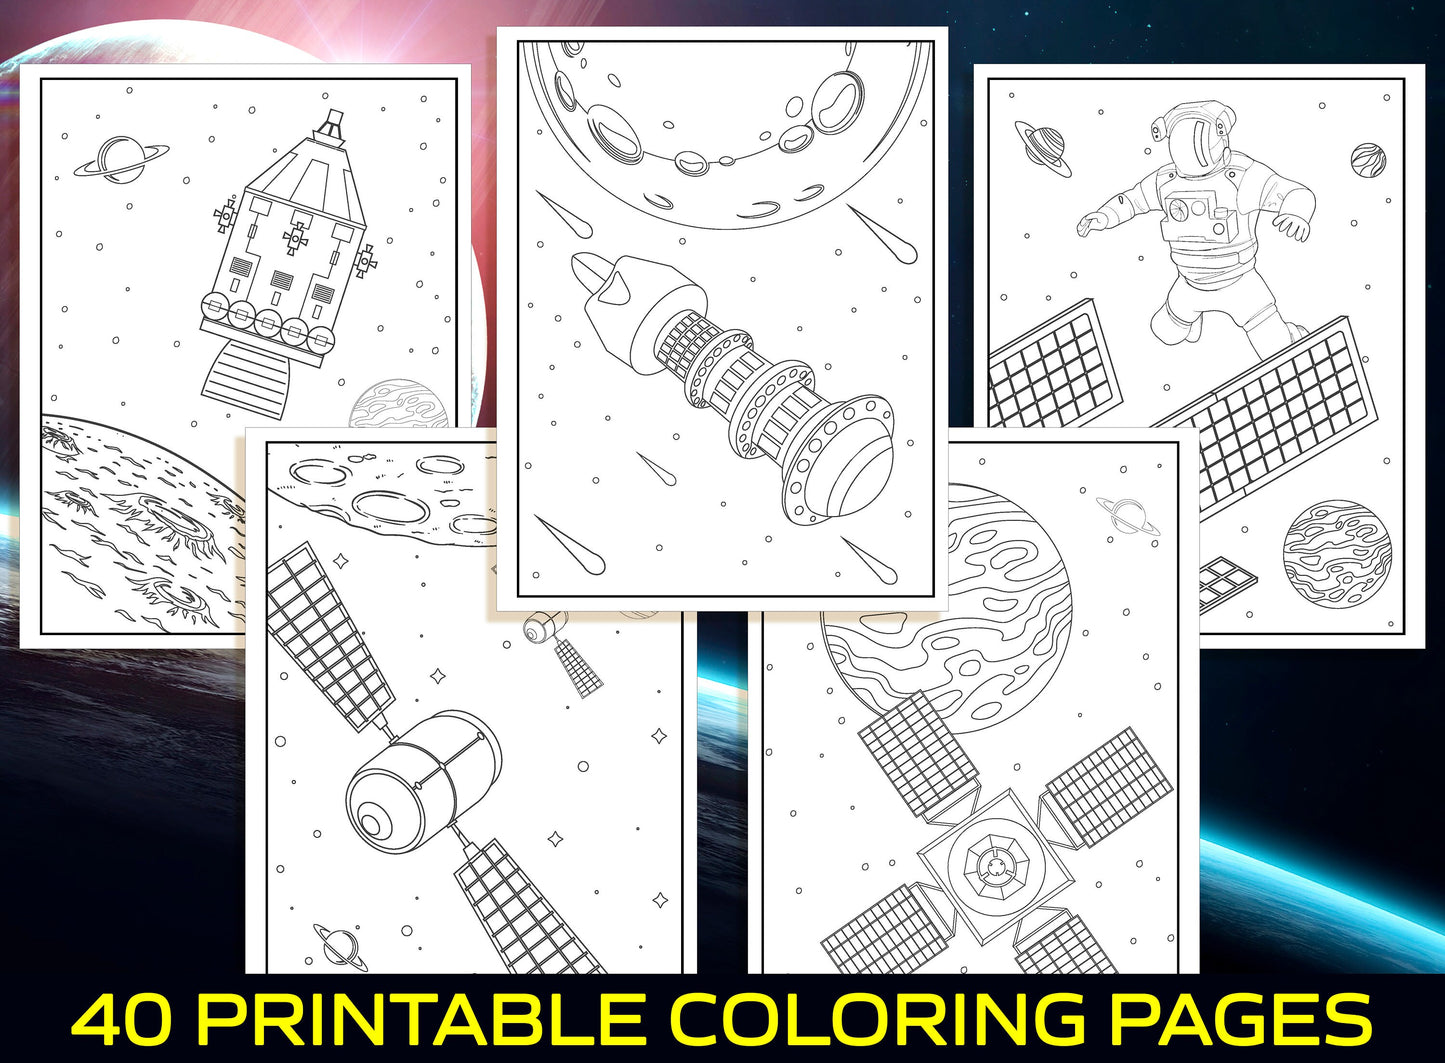 Space Coloring Pages - 40 Printable Space Coloring Pages for Kids, Boys, Girls, Teens. Space Adventures, Galaxy, Astronaut, UFO, Aliens...